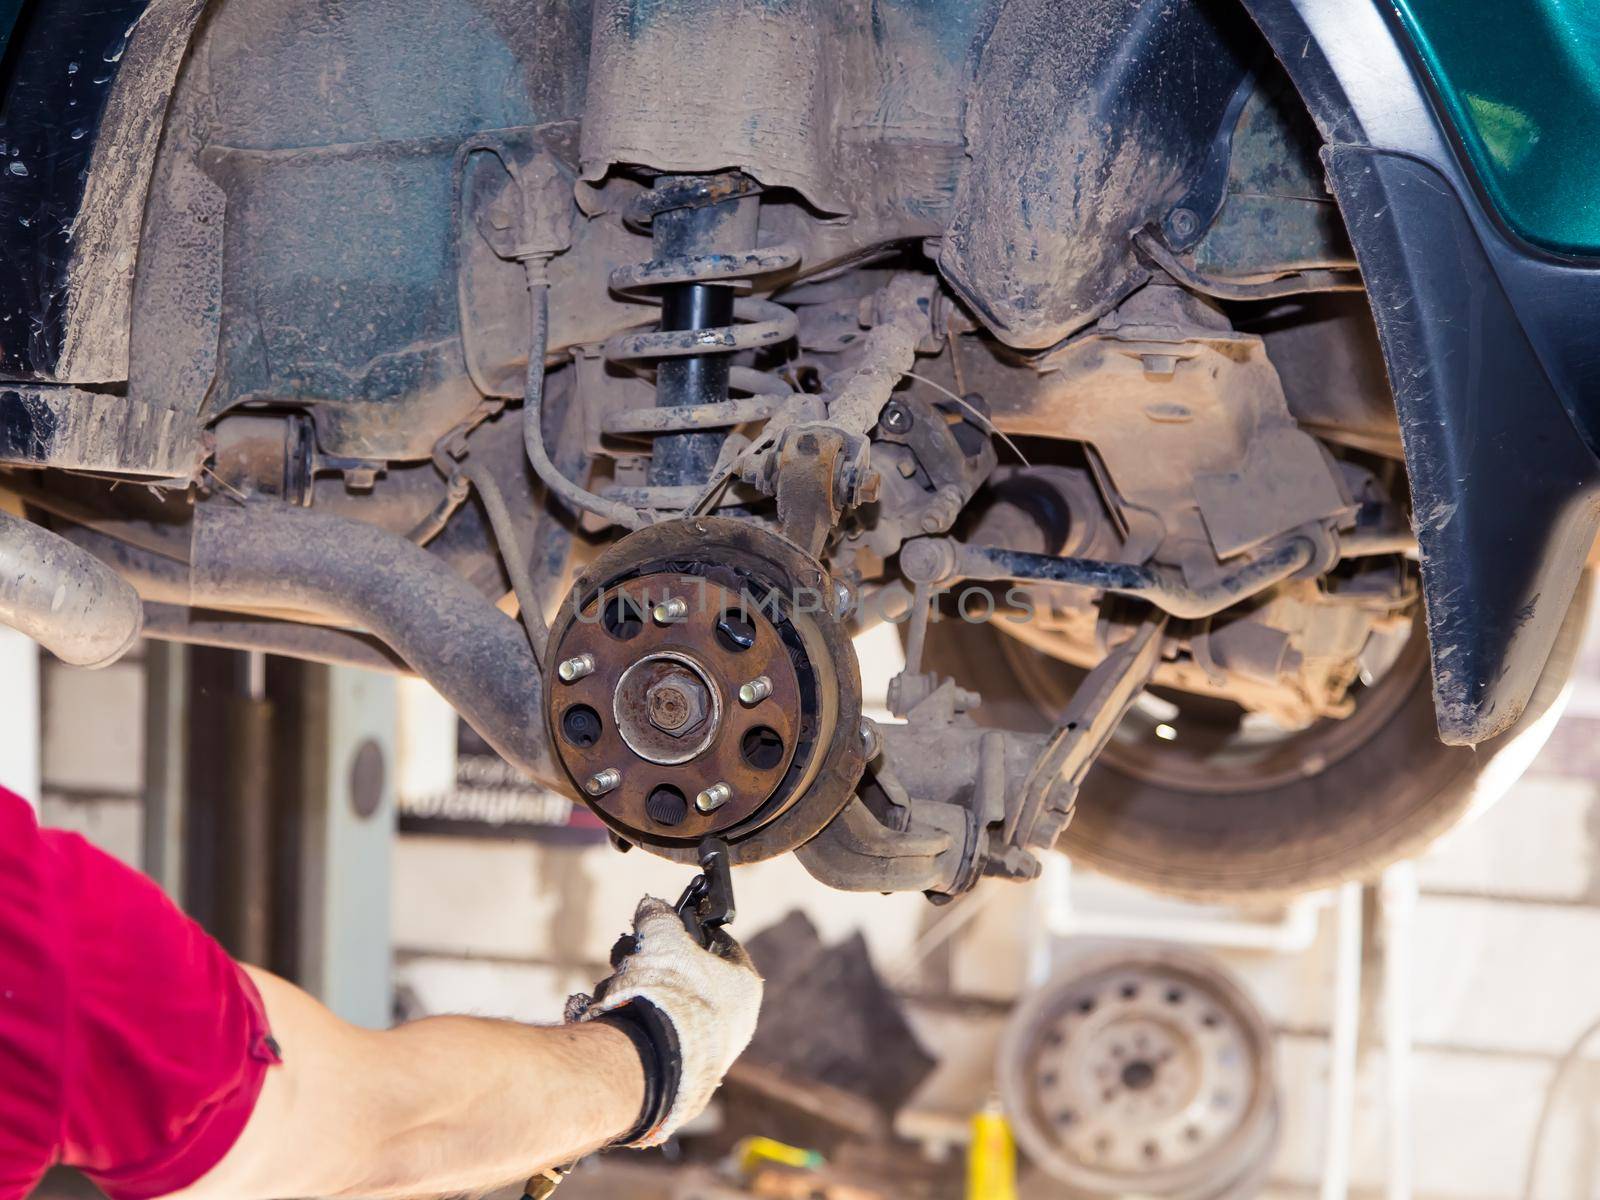 Hands blow off dirt from the worn rear wheel hub with a jet of air. In the garage, a person changes the failed parts on the vehicle. Small business concept, car repair and maintenance service.